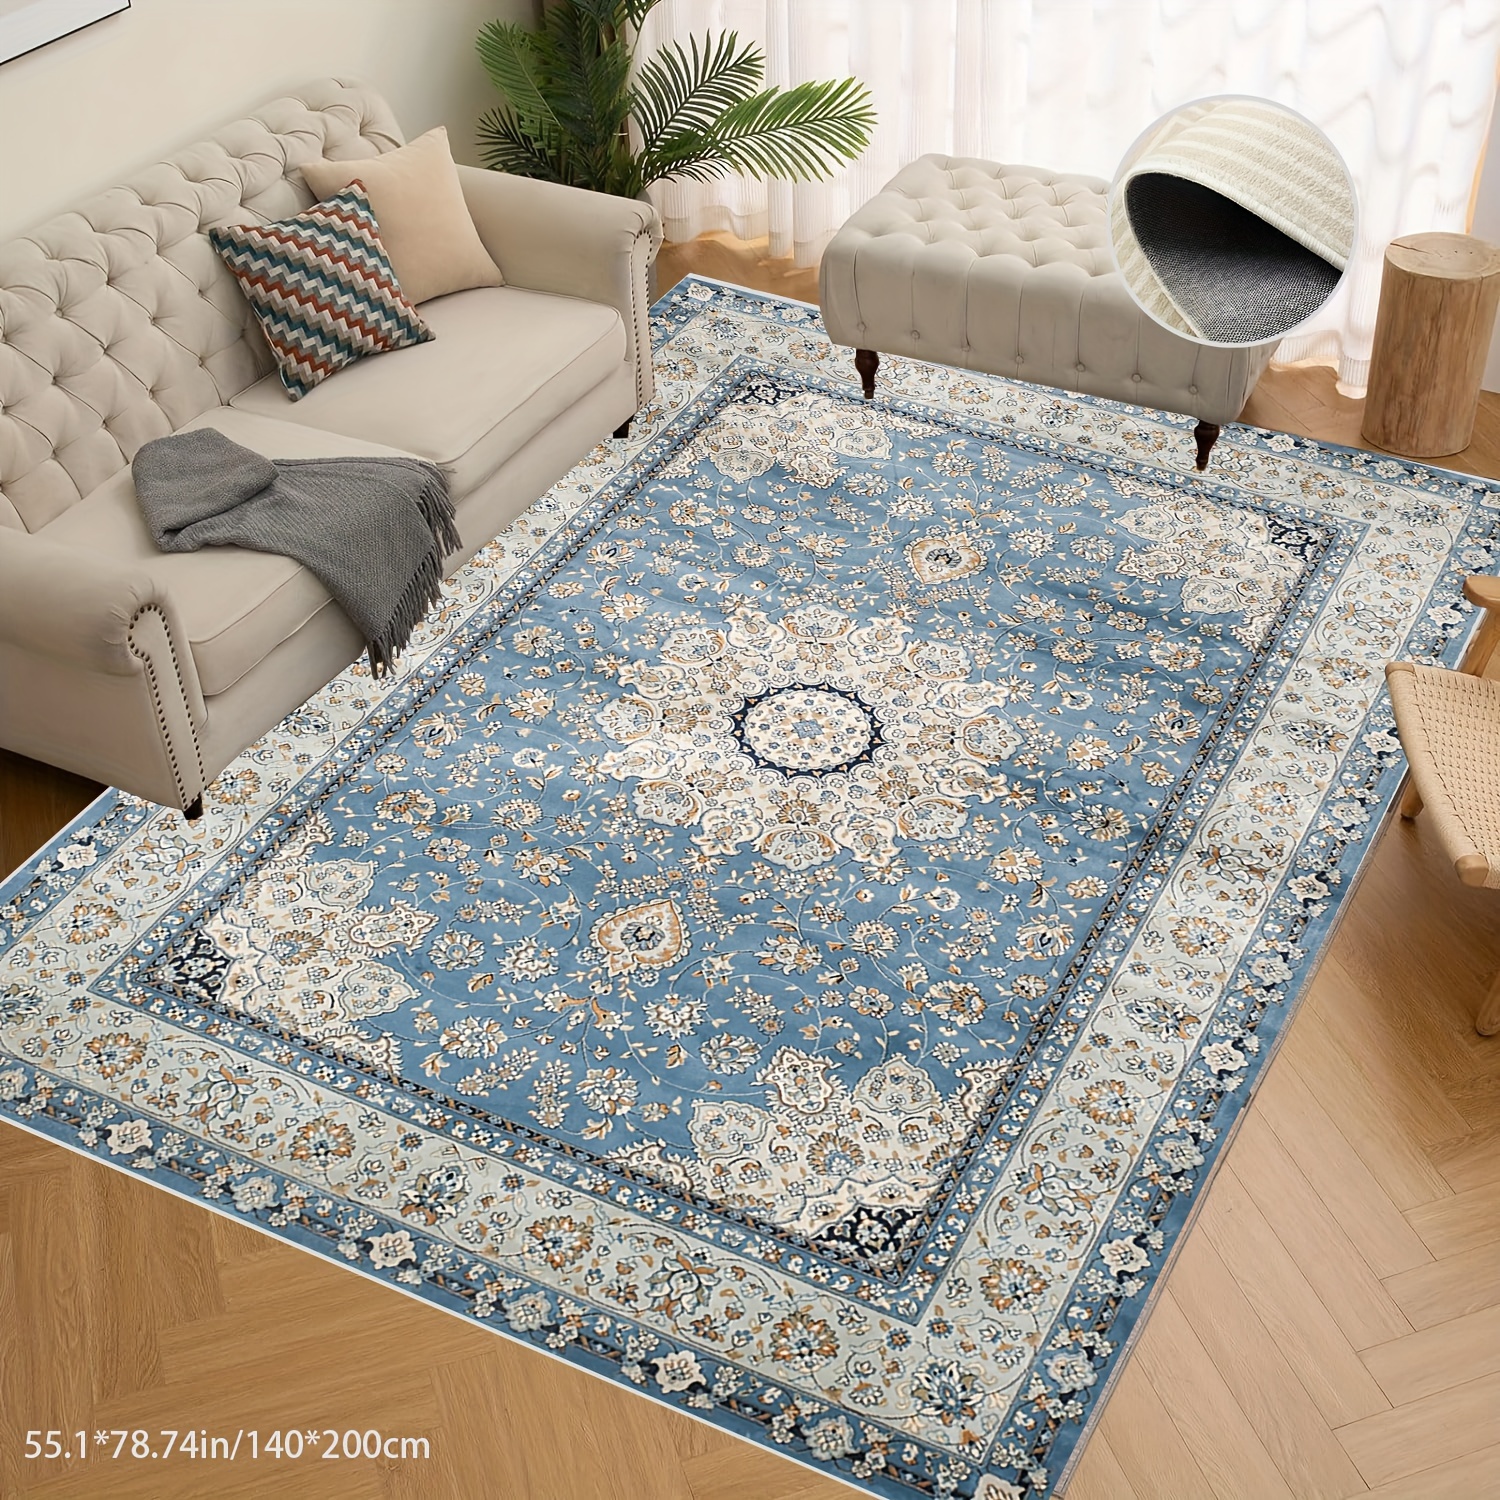 

1pc Imitated Cashmere 1250g/flat Bottom Cloth Thickness 12mm Classic Retro Traditional Rug, Non-slip, Waterproof And Stain-resistant, Washable, Indoor And Outdoor Rug, Short Fleece, Oriental Design